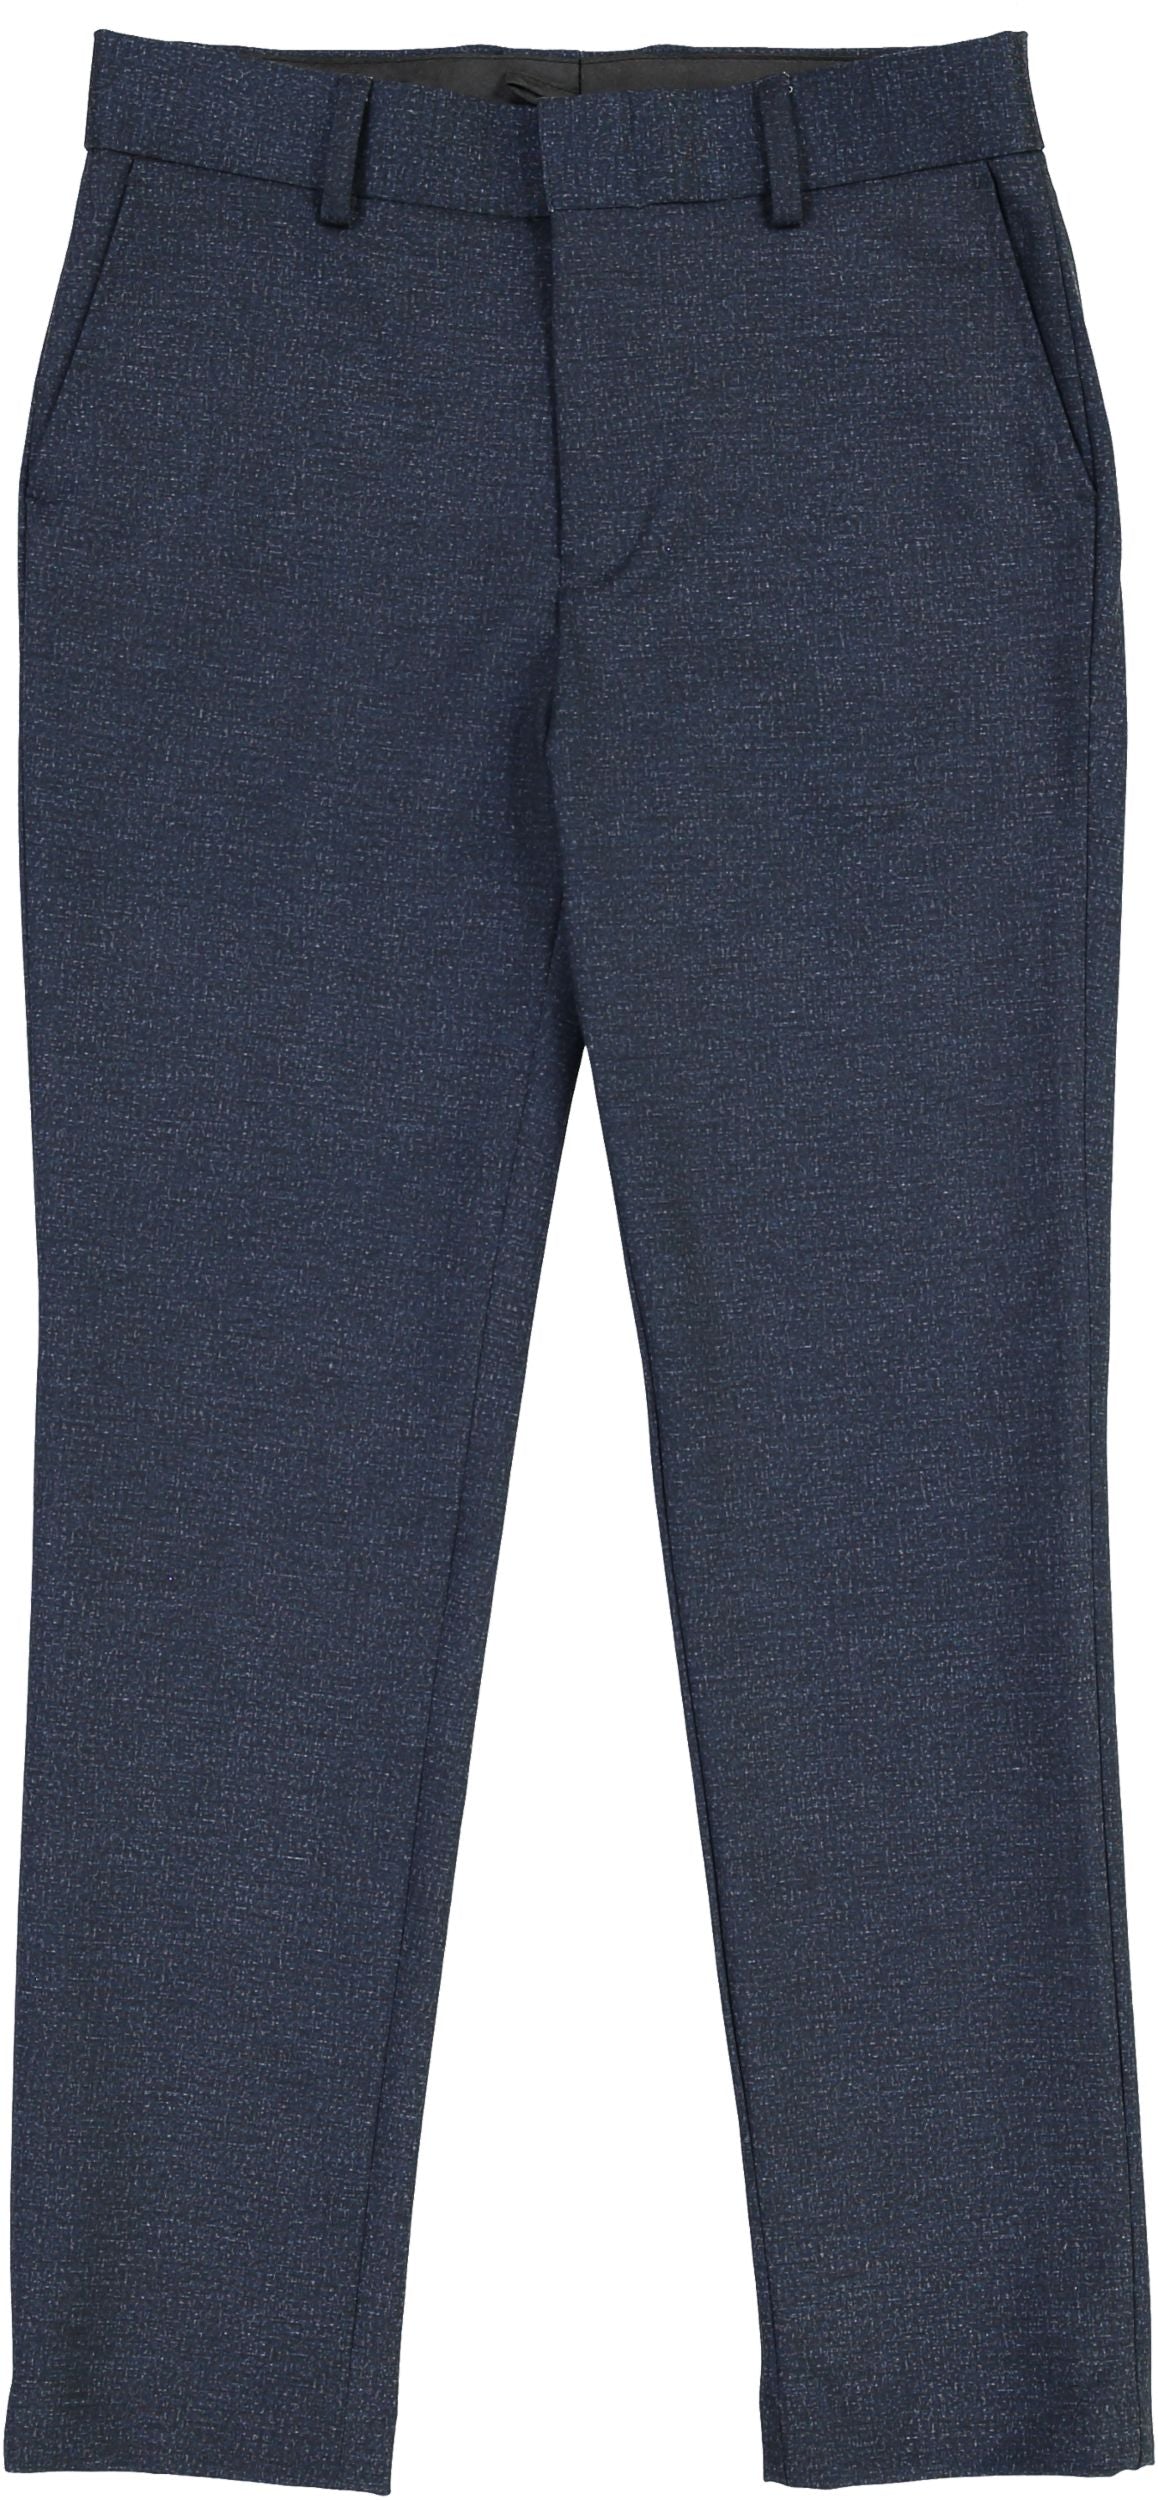 T.O. Collection Boys Navy Fancy Soho Stretch Suit Separates - 9131-6